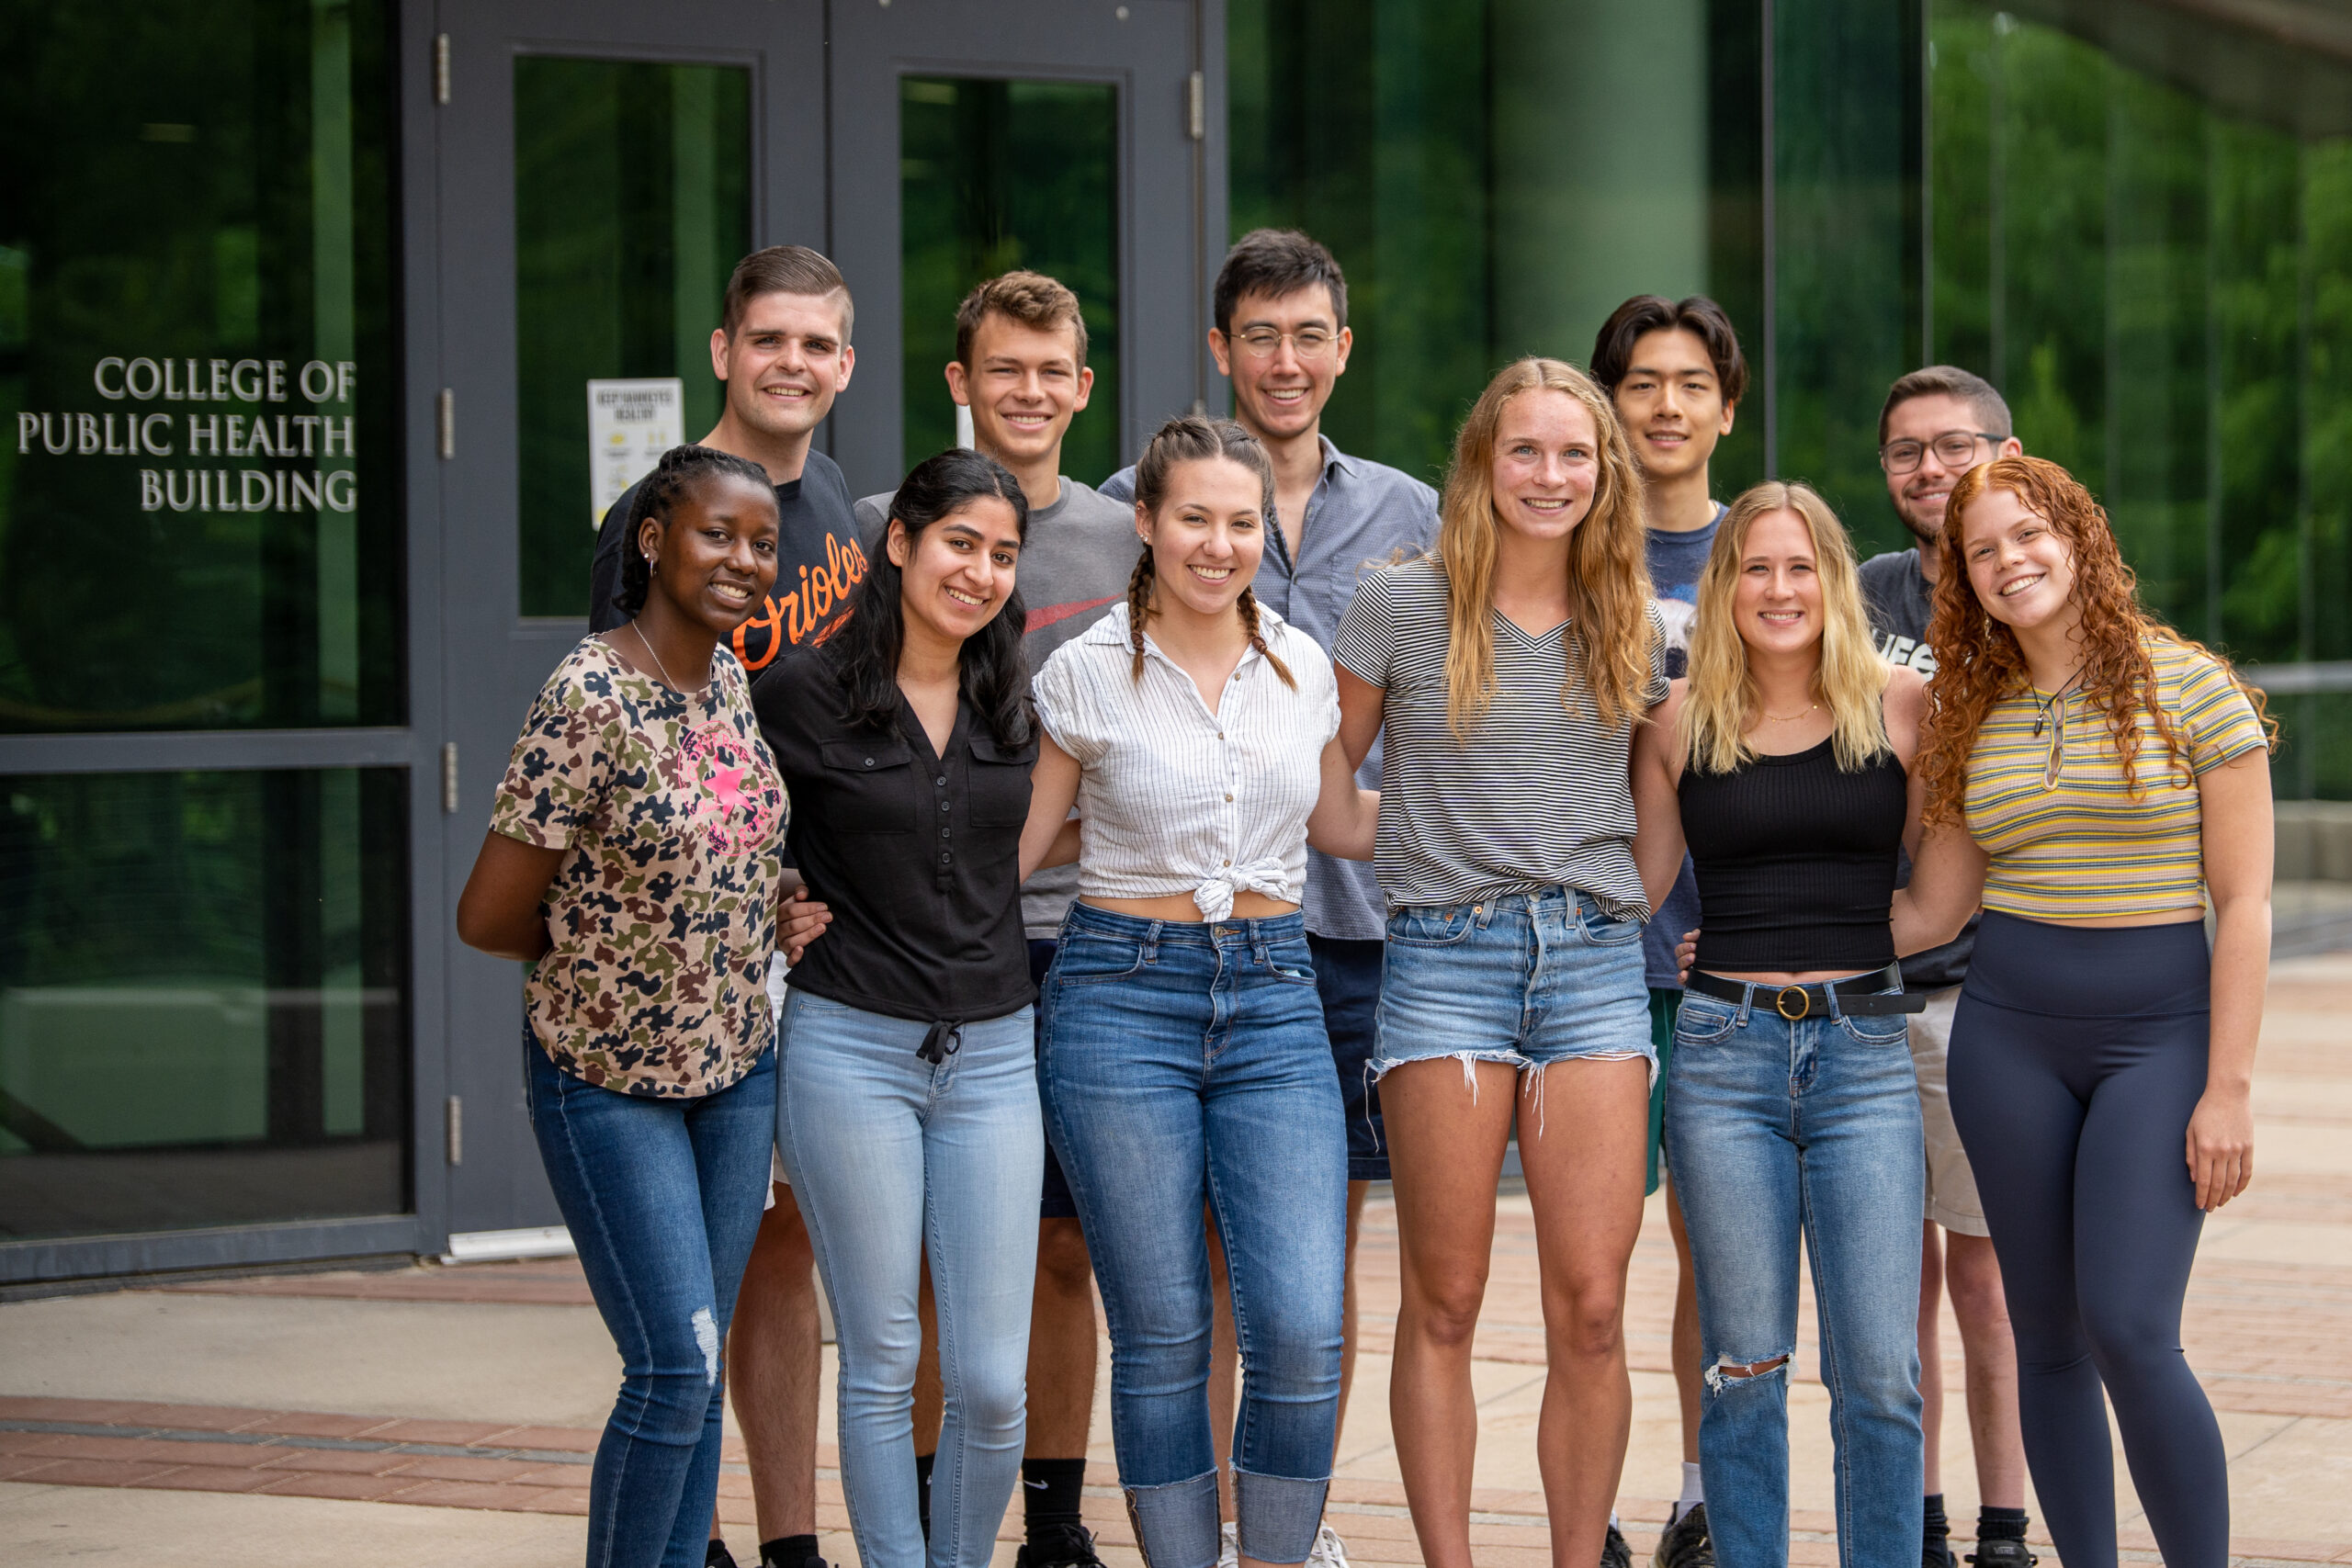 Portrait of the Iowa Summer Institute in Biostatistics class of 2022 posing in front of the College of Public Health Building.